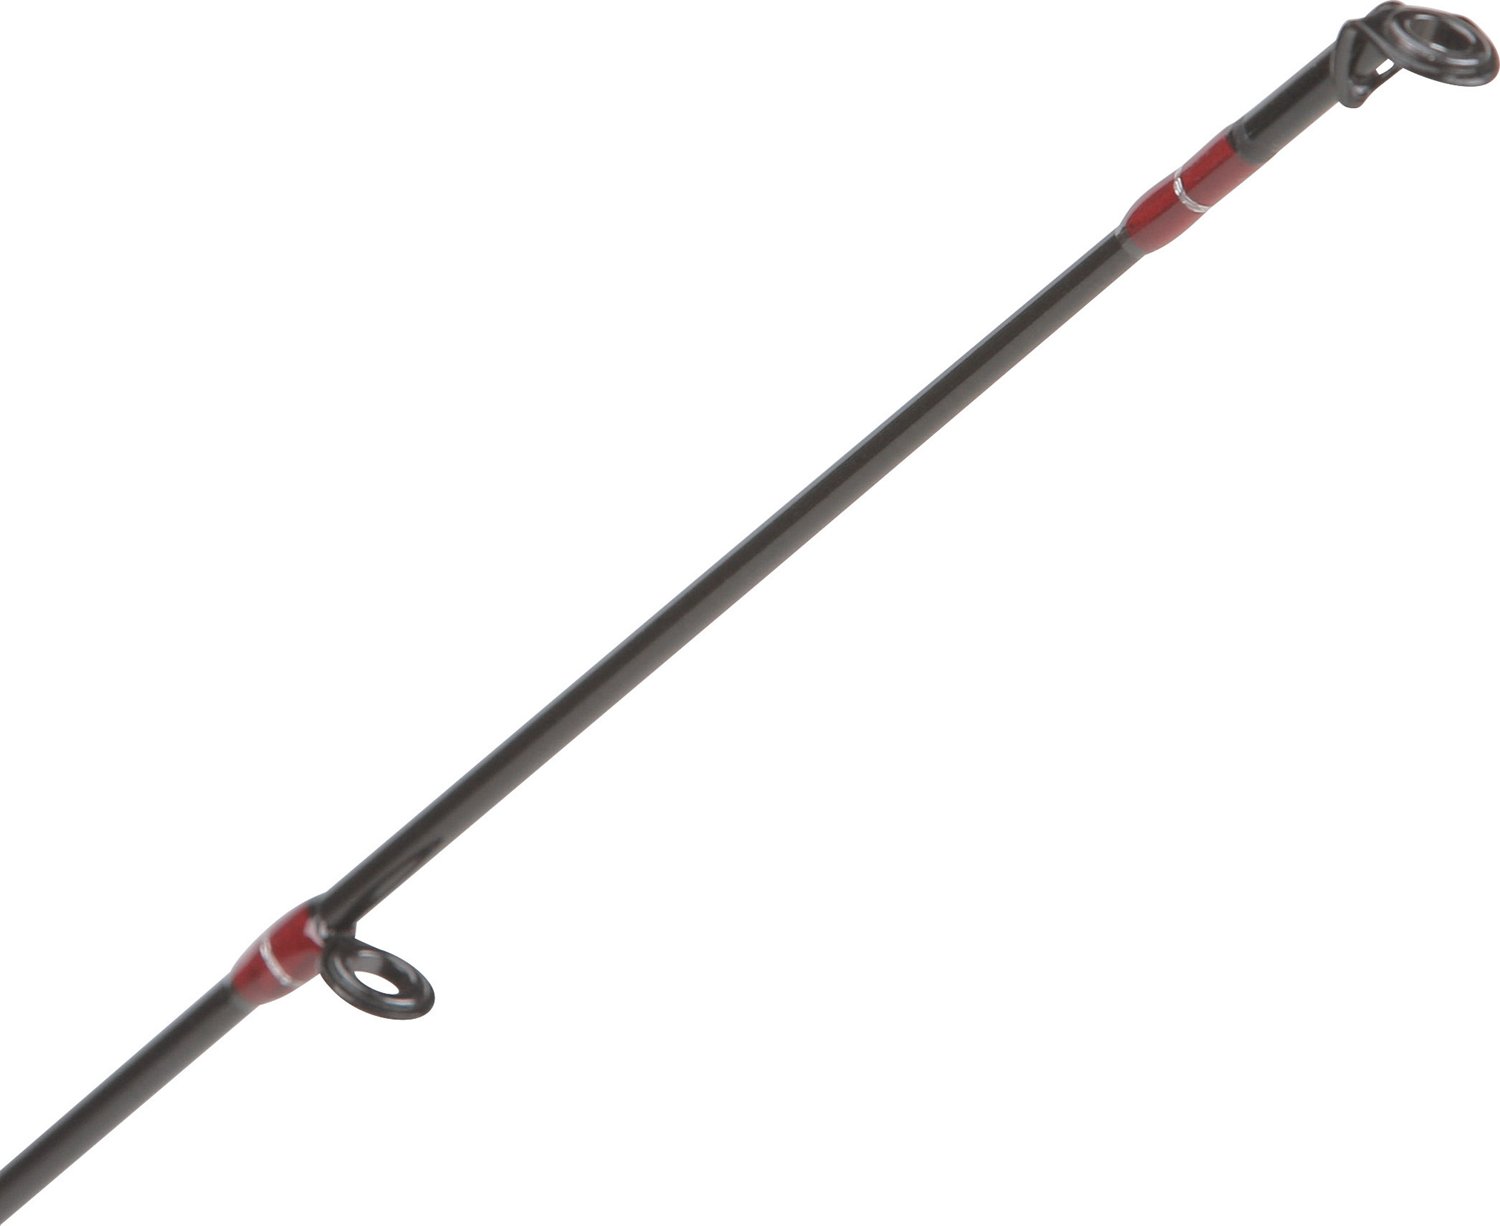 FISHING ROD - ALLSTAR AST 6'6 WORM MH - CASTING ROD for Sale in